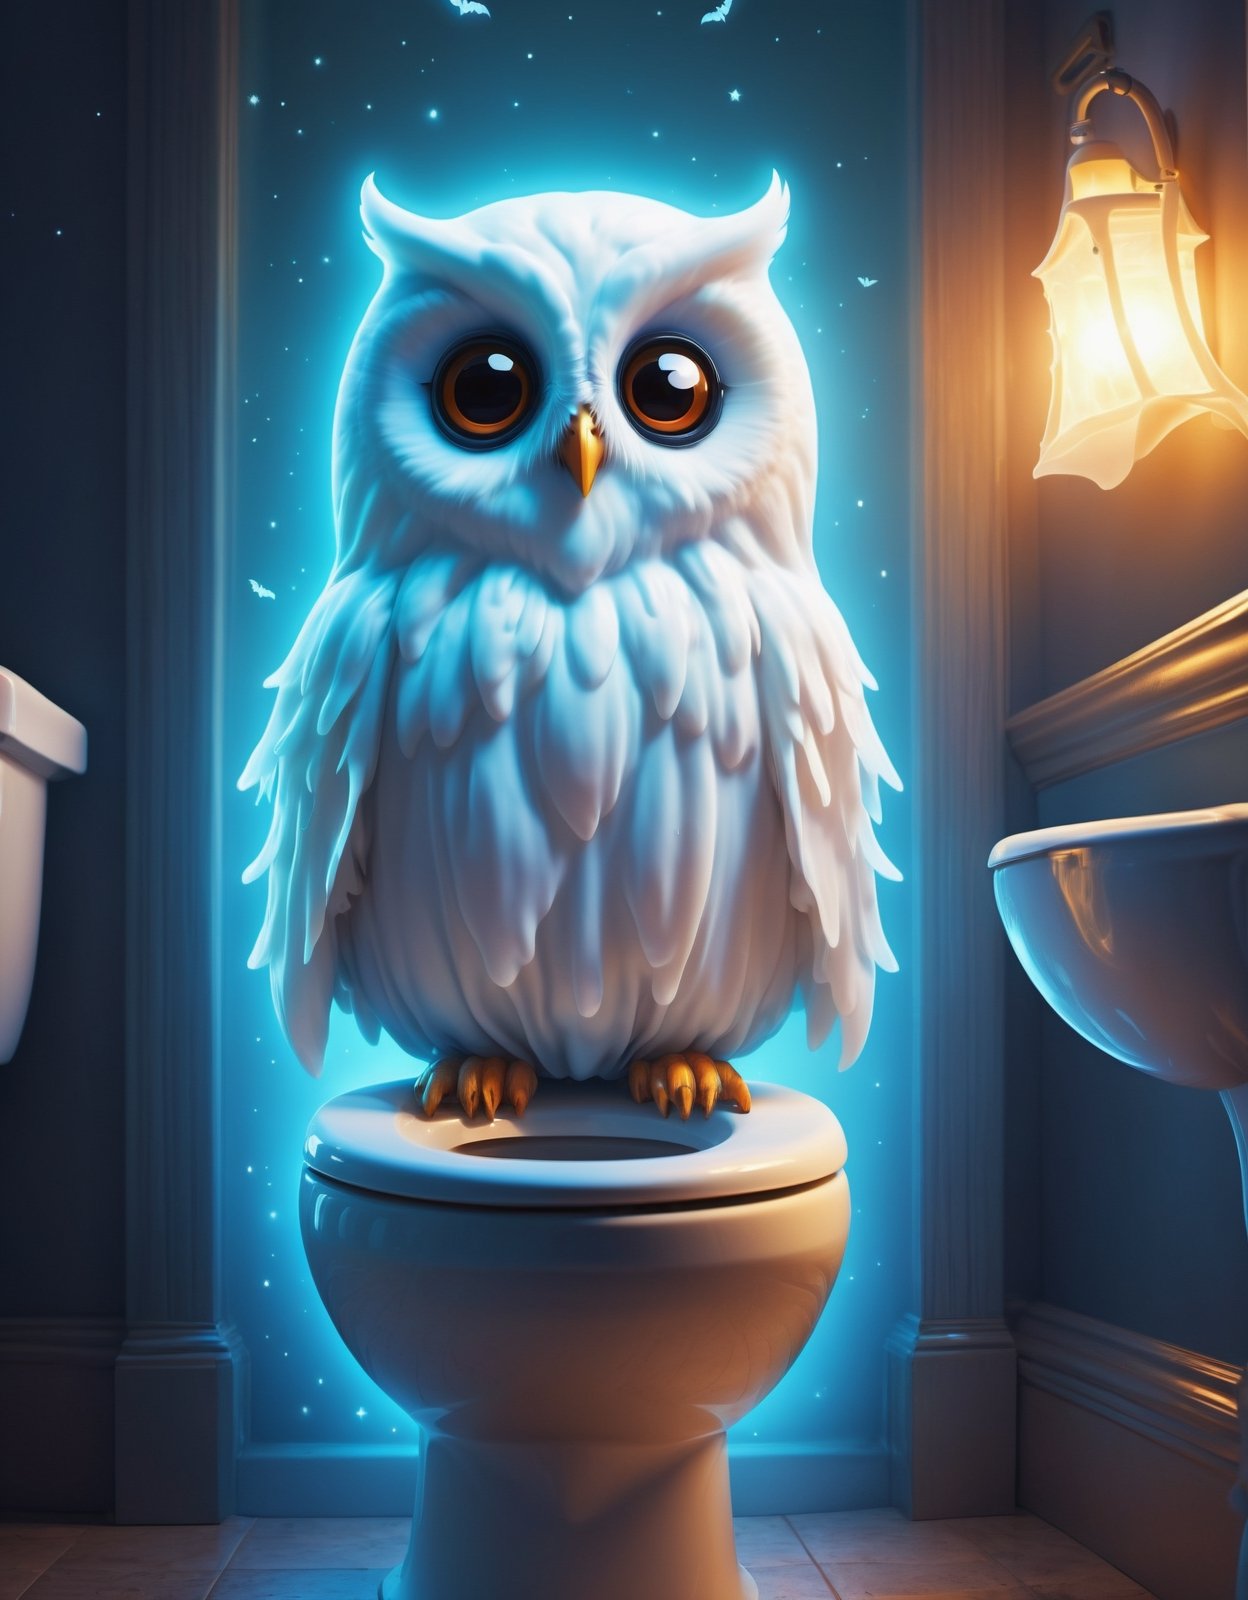 Digital image of an adorable ghost glowing inside, toilet, owl, Halloween, high quality, masterpiece, 8k, super cute, flying ghosts 